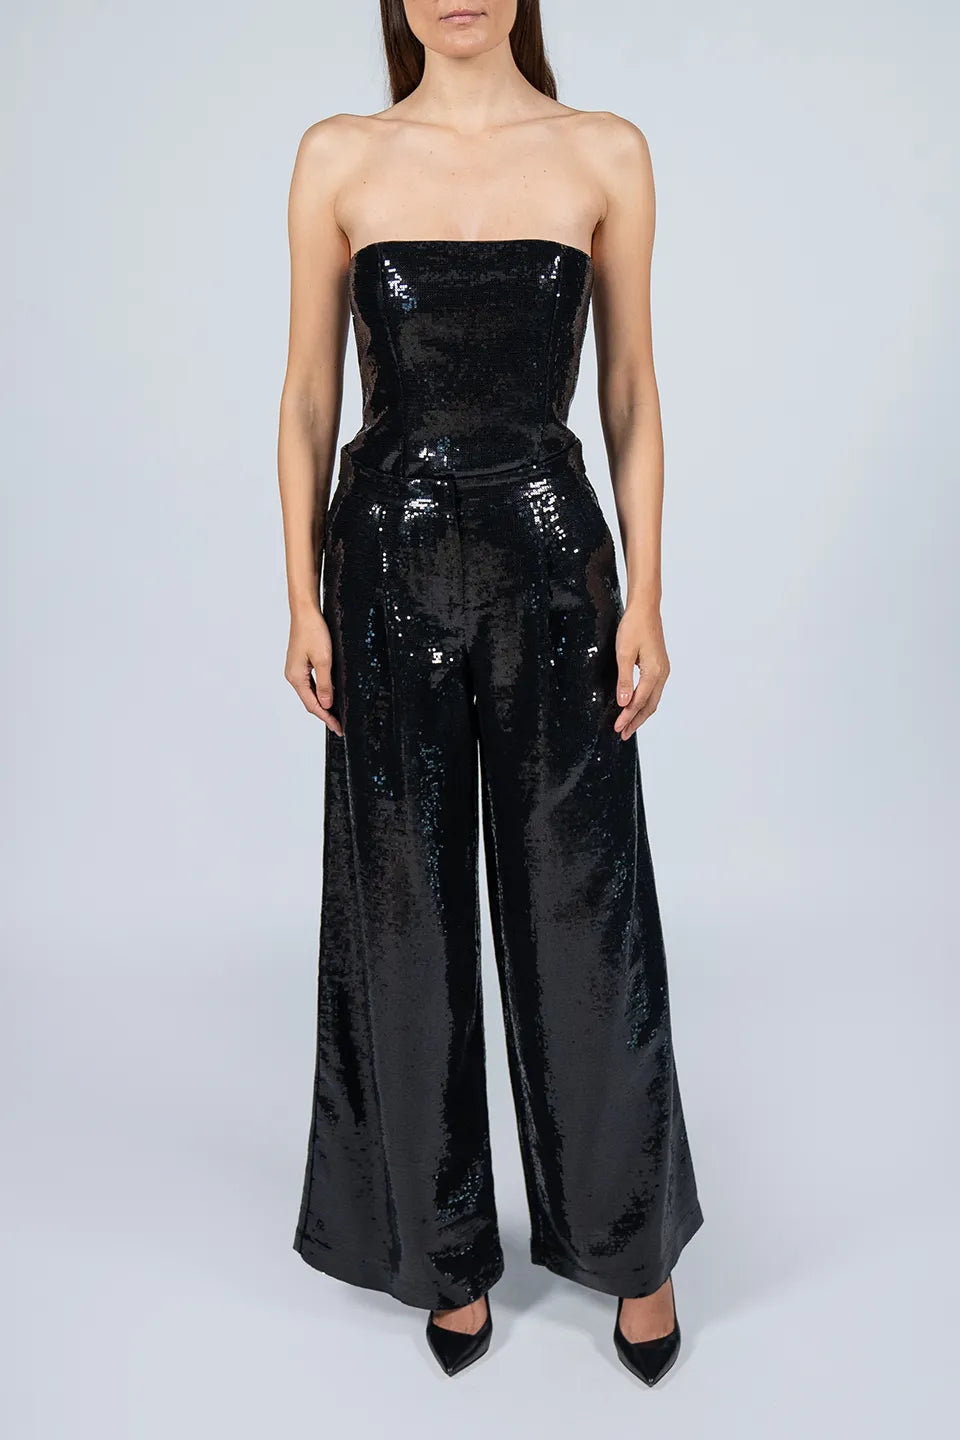 Shop online trendy Black Women pants from Federica Tosi Fashion designer. Product gallery 1